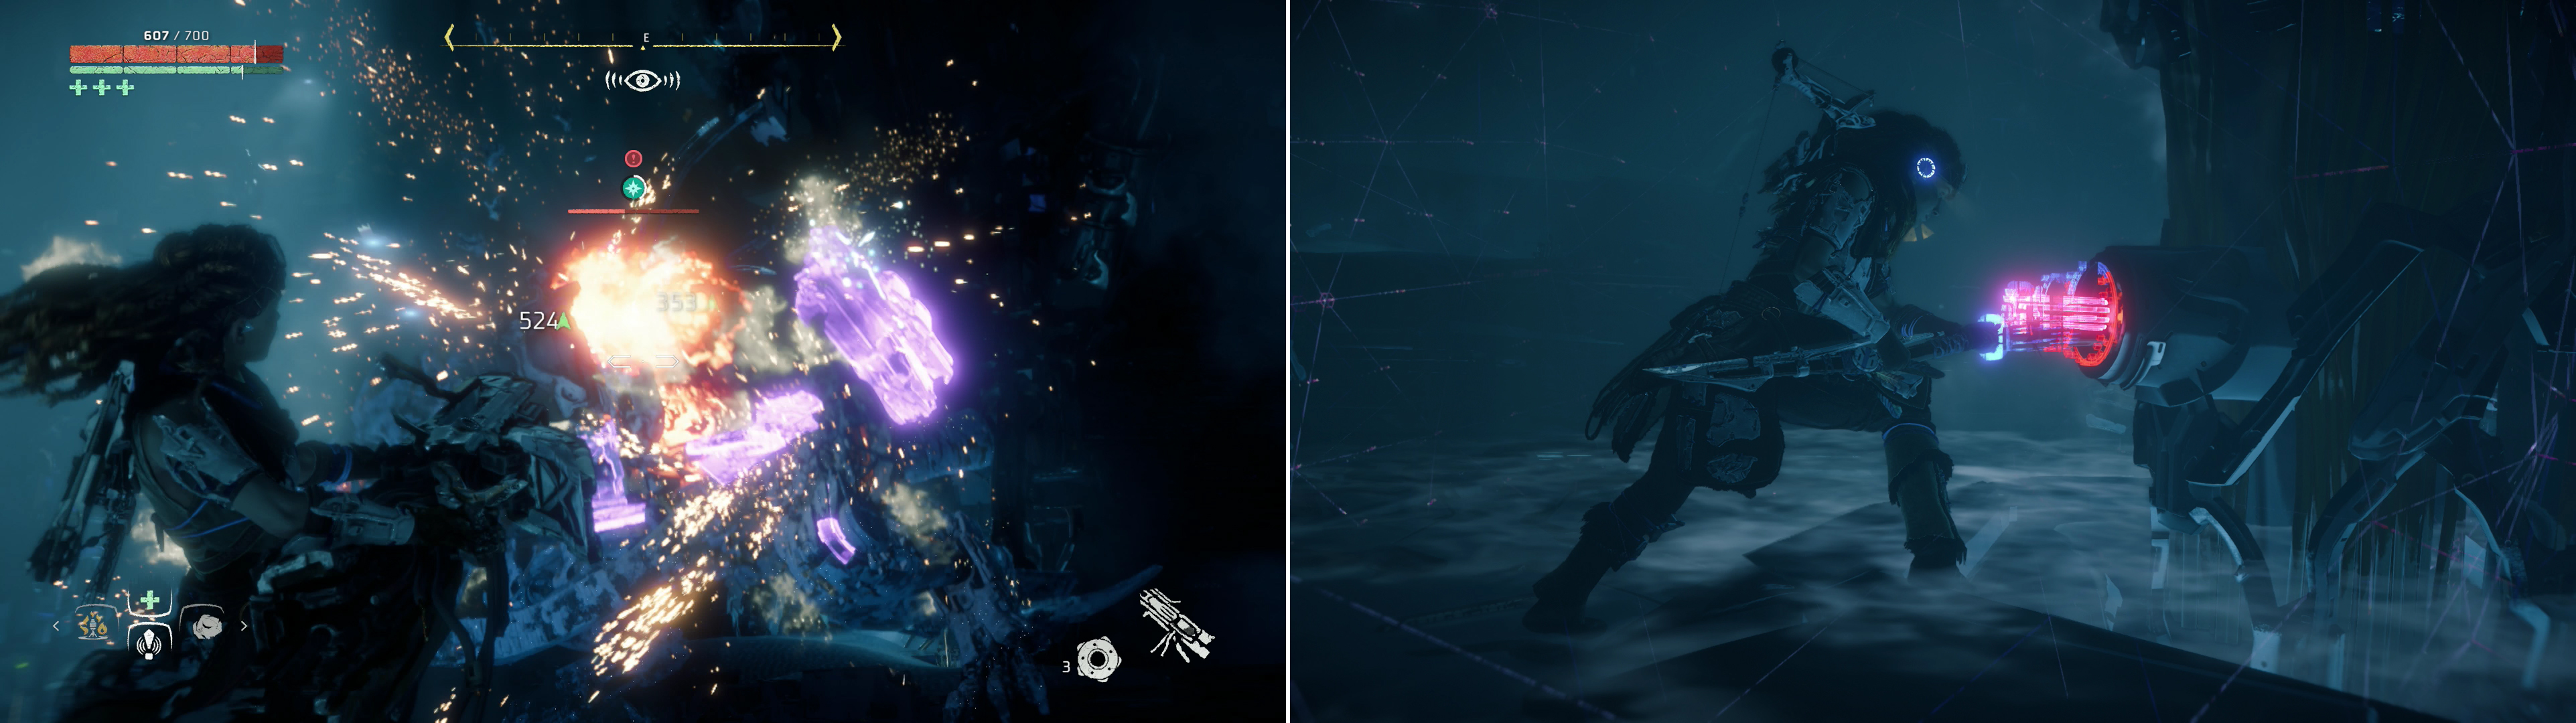 Once frozen, grab the detached Disc Launcher and give the Thunderjaw a taste of its own medicine (left) then hack Cauldron Zeta’s core (right).